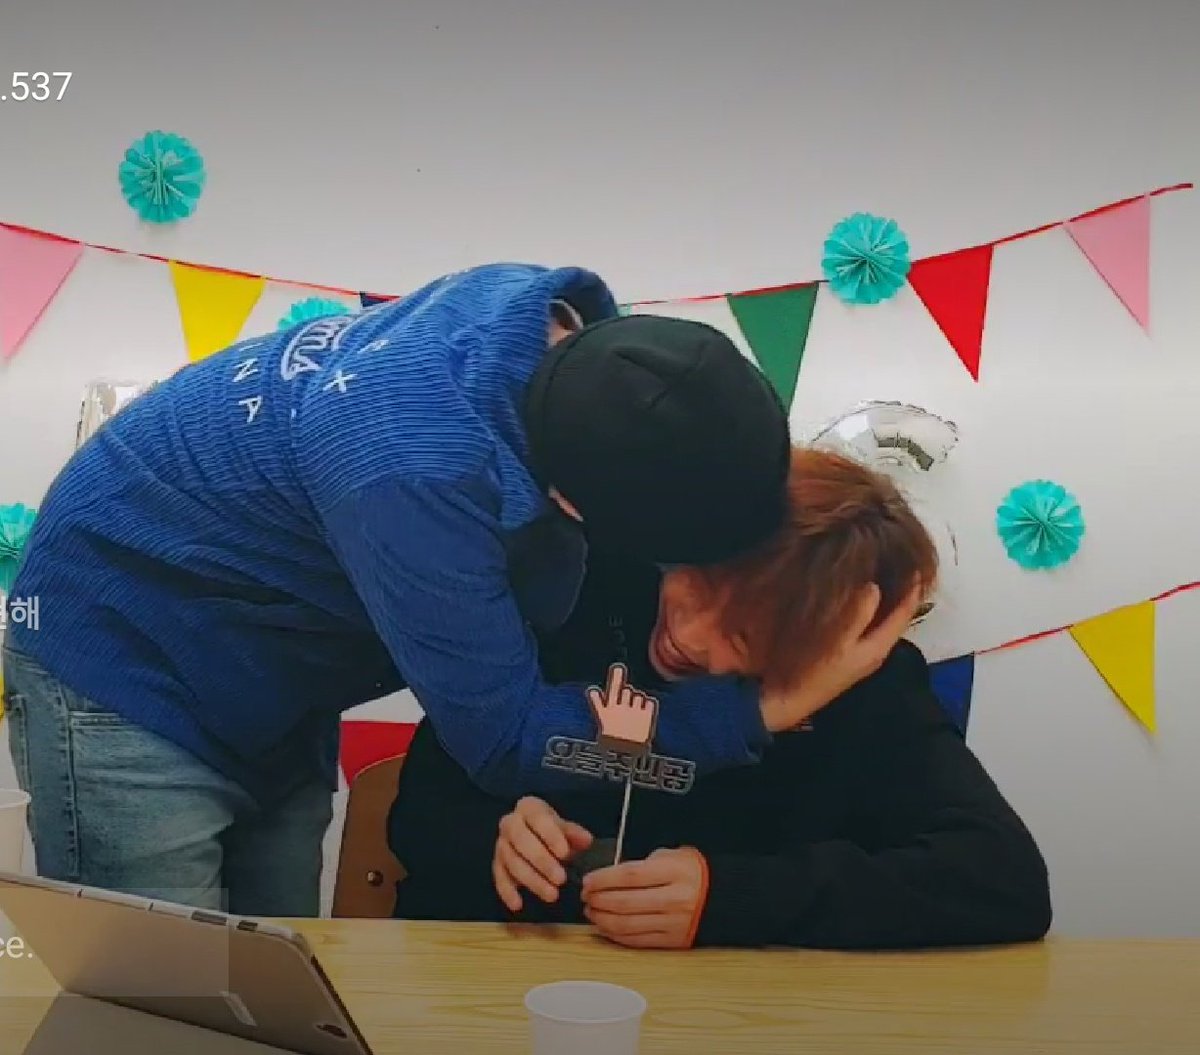 Jaehyun not being able to hide his fondness for the birthday boy